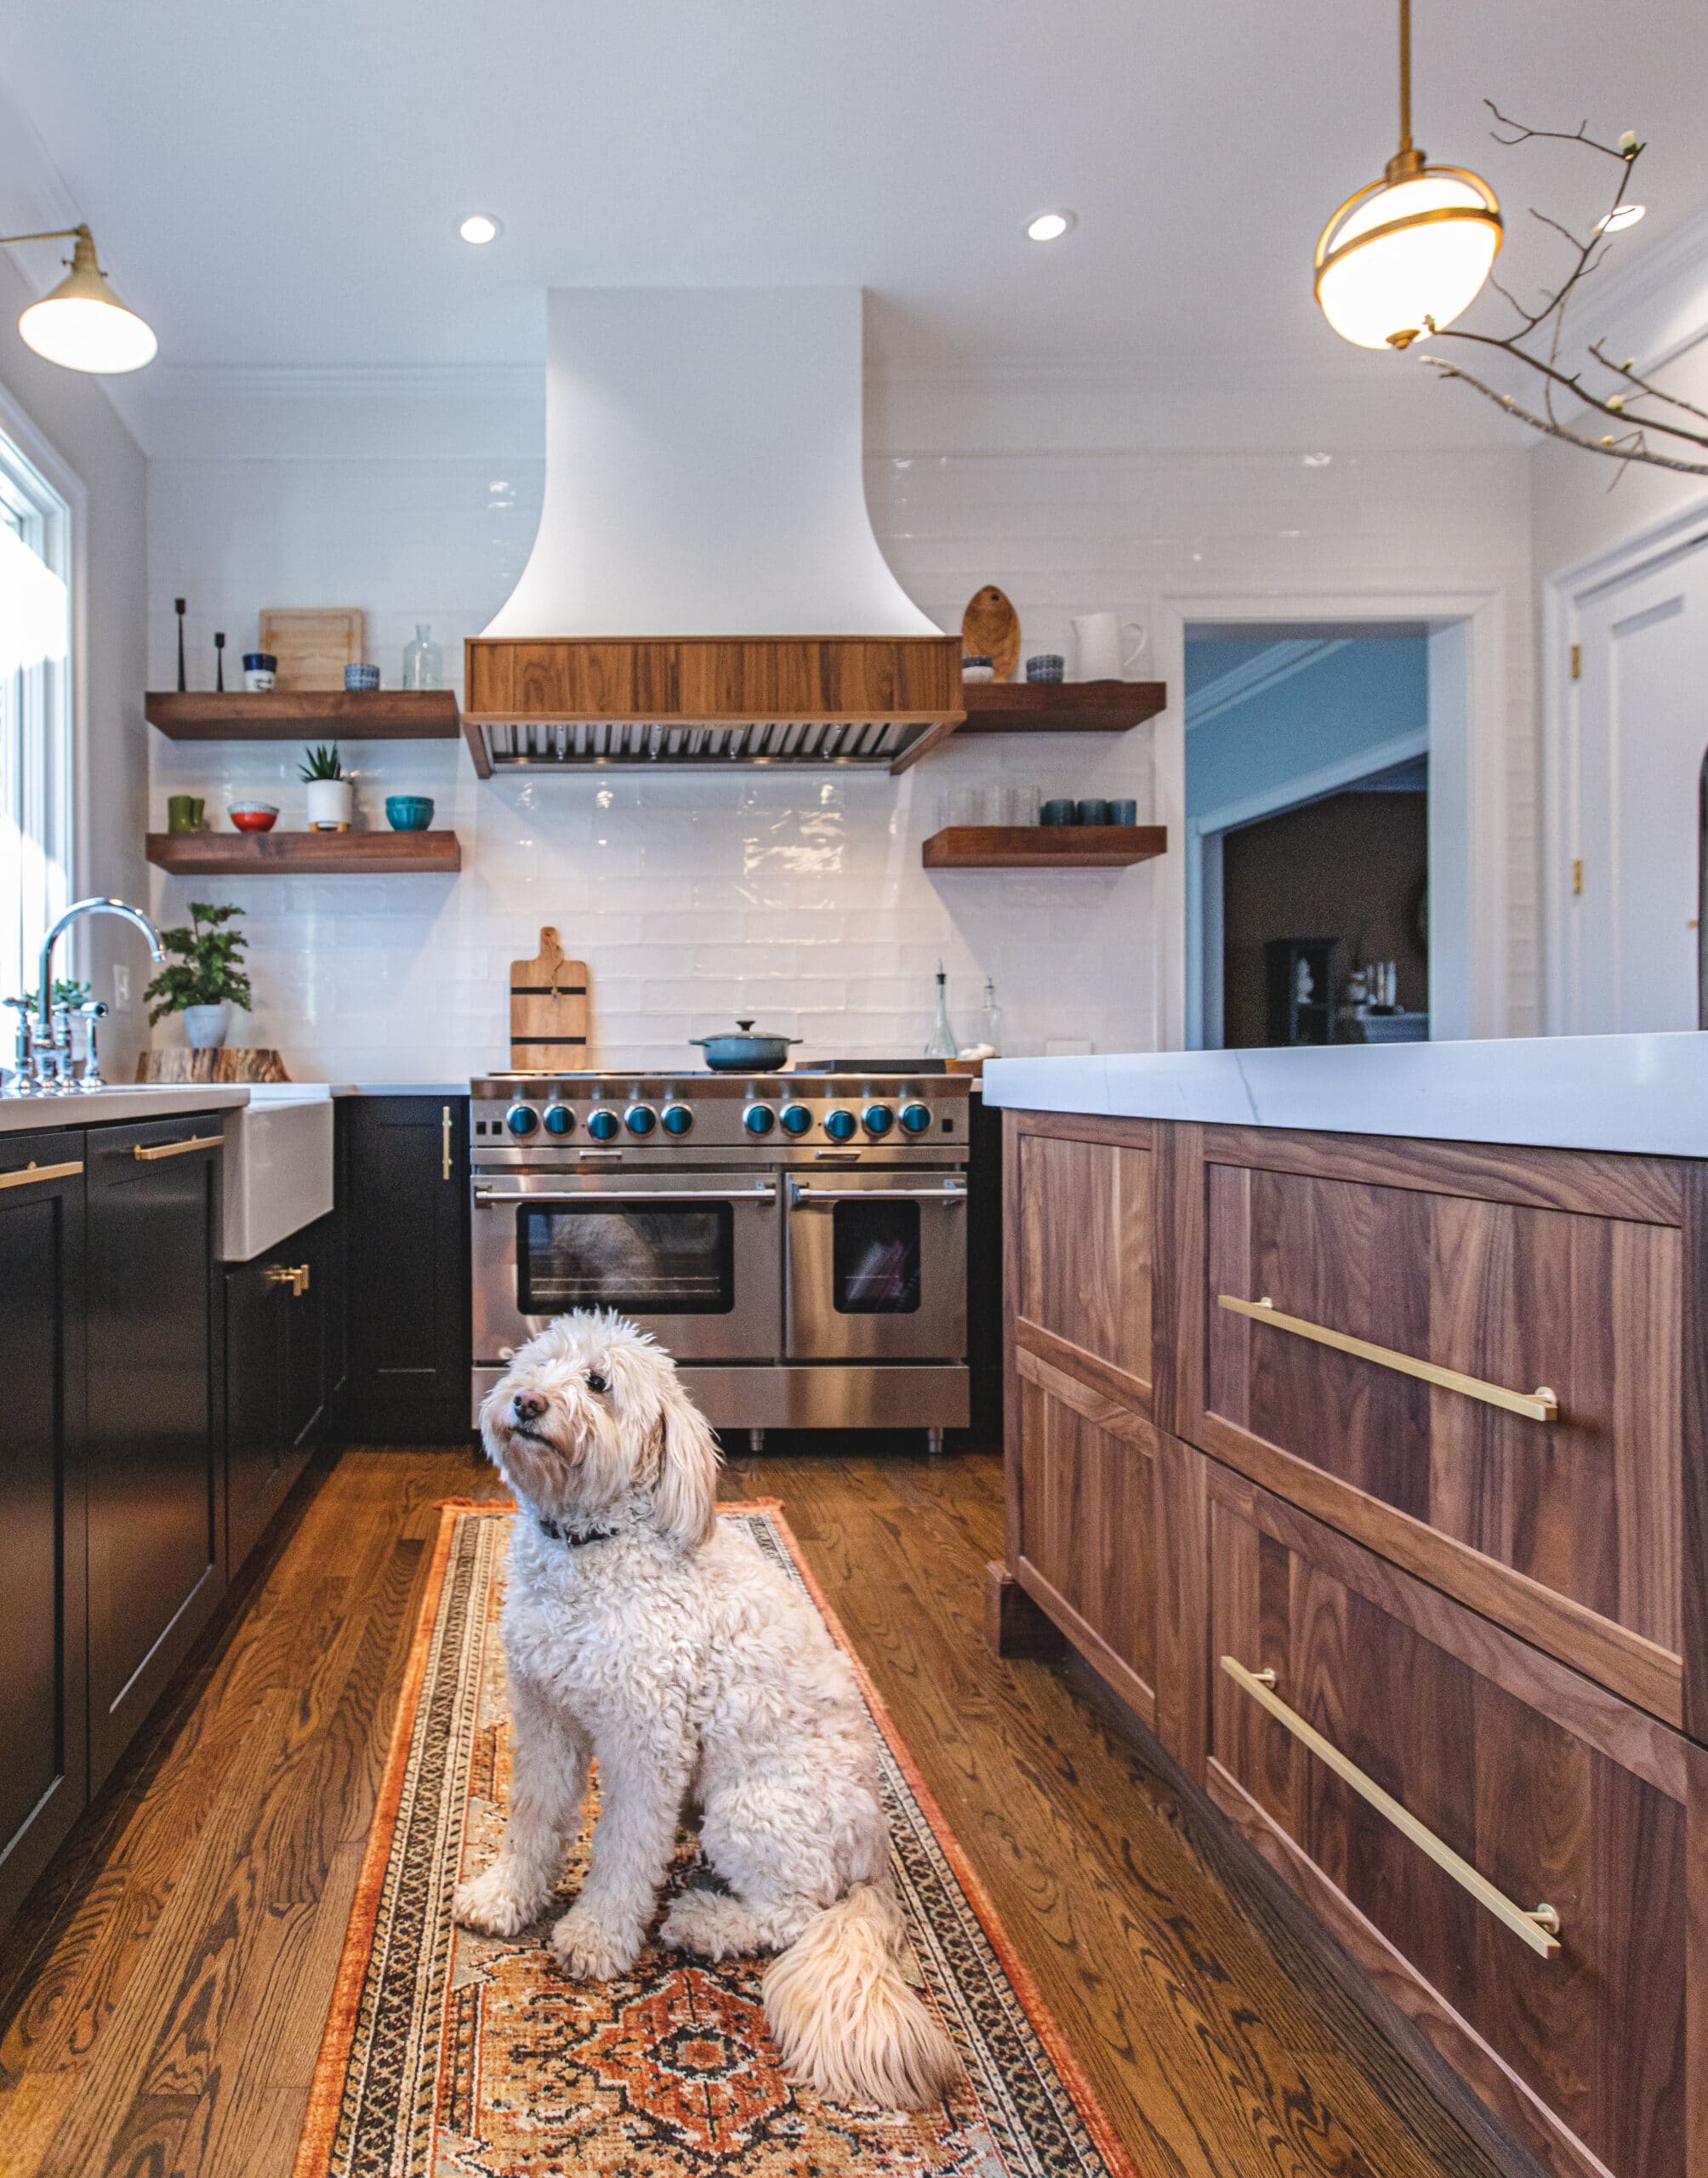 A dog sitting on a rug in a kitchen